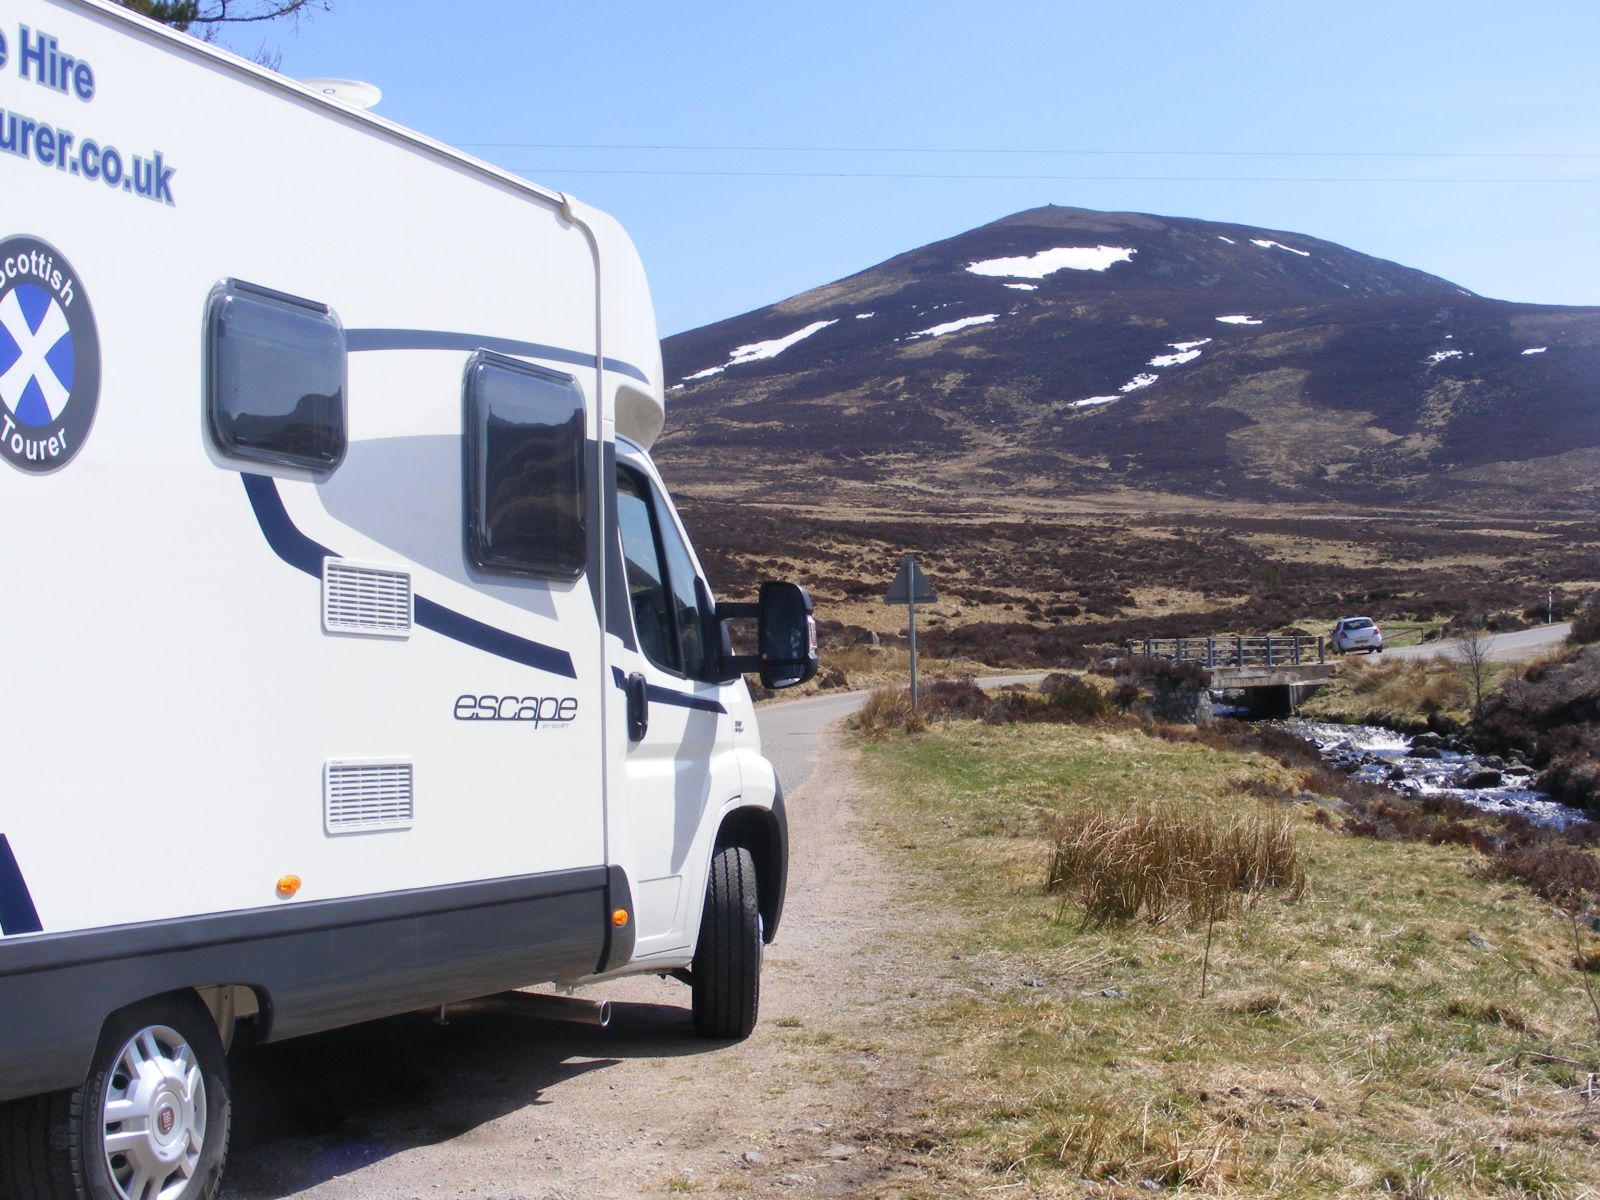 motorhome tips for beginners: hire a motorhome in Scotland